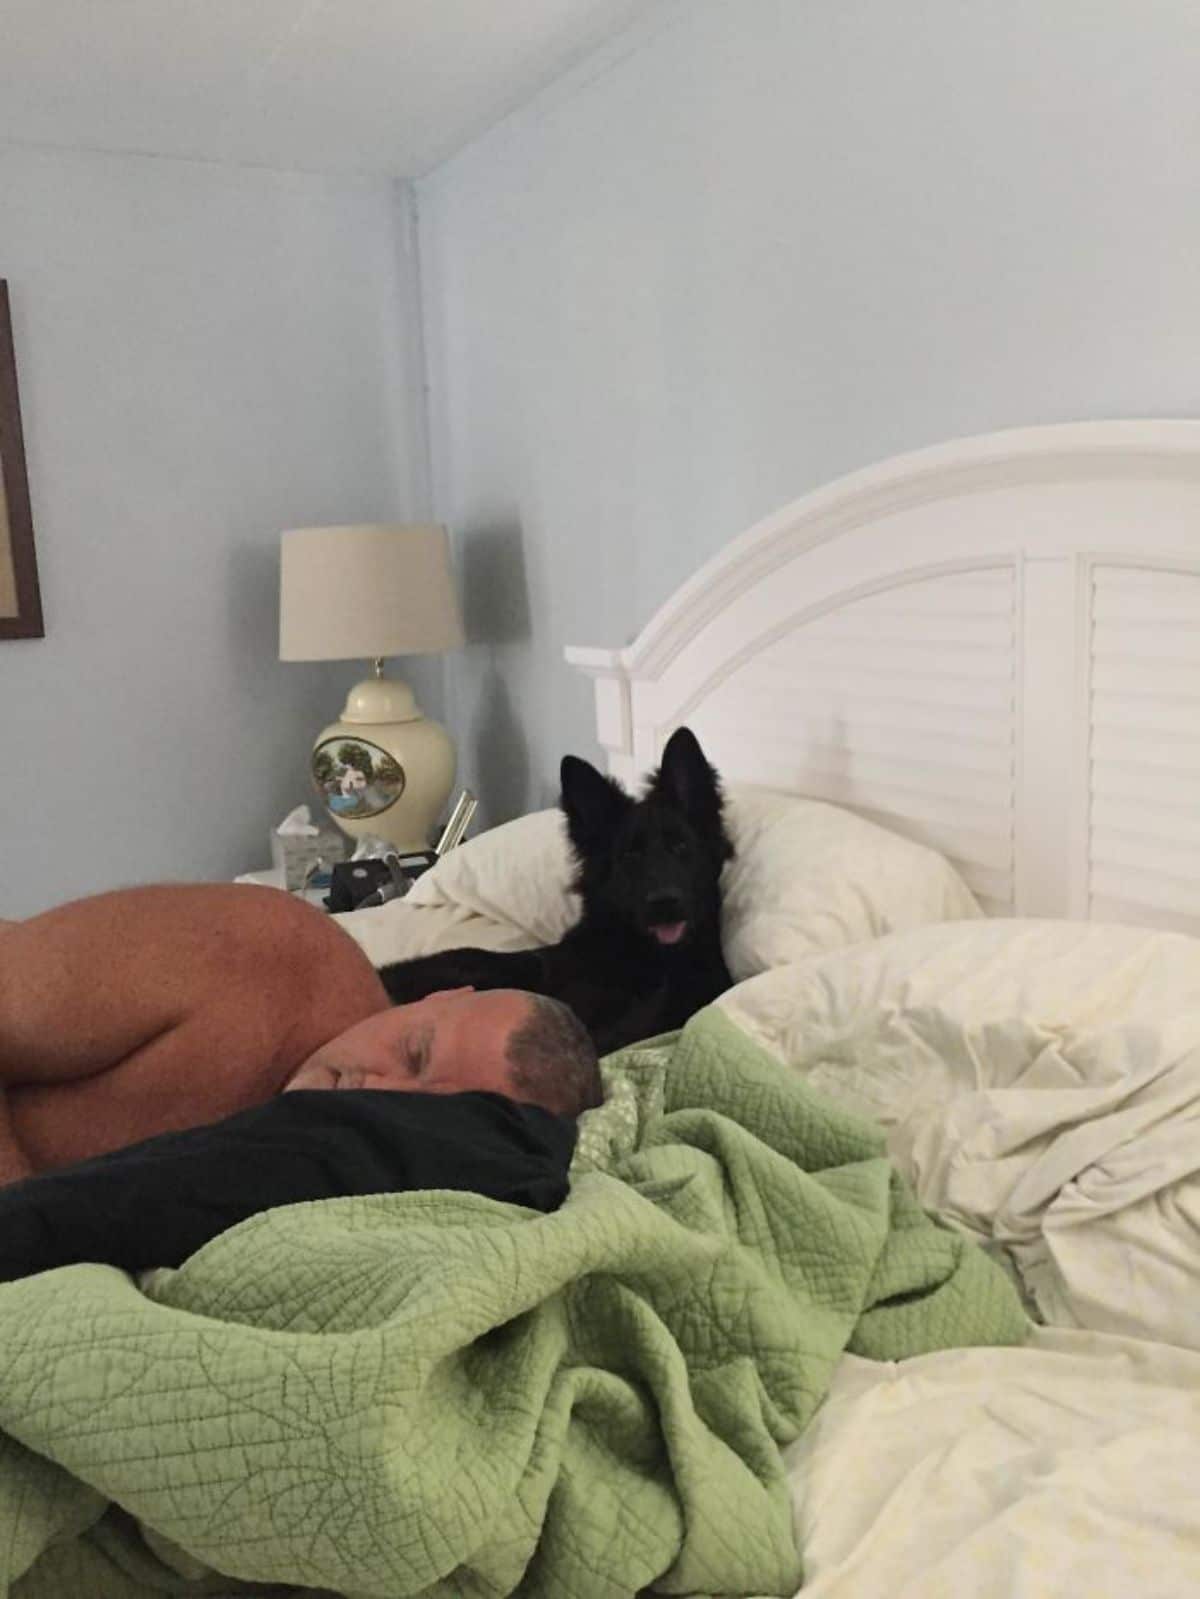 fluffy black puppy laying on a bed with the head against a white pilly while an old man is sleeping on blankets on the bed